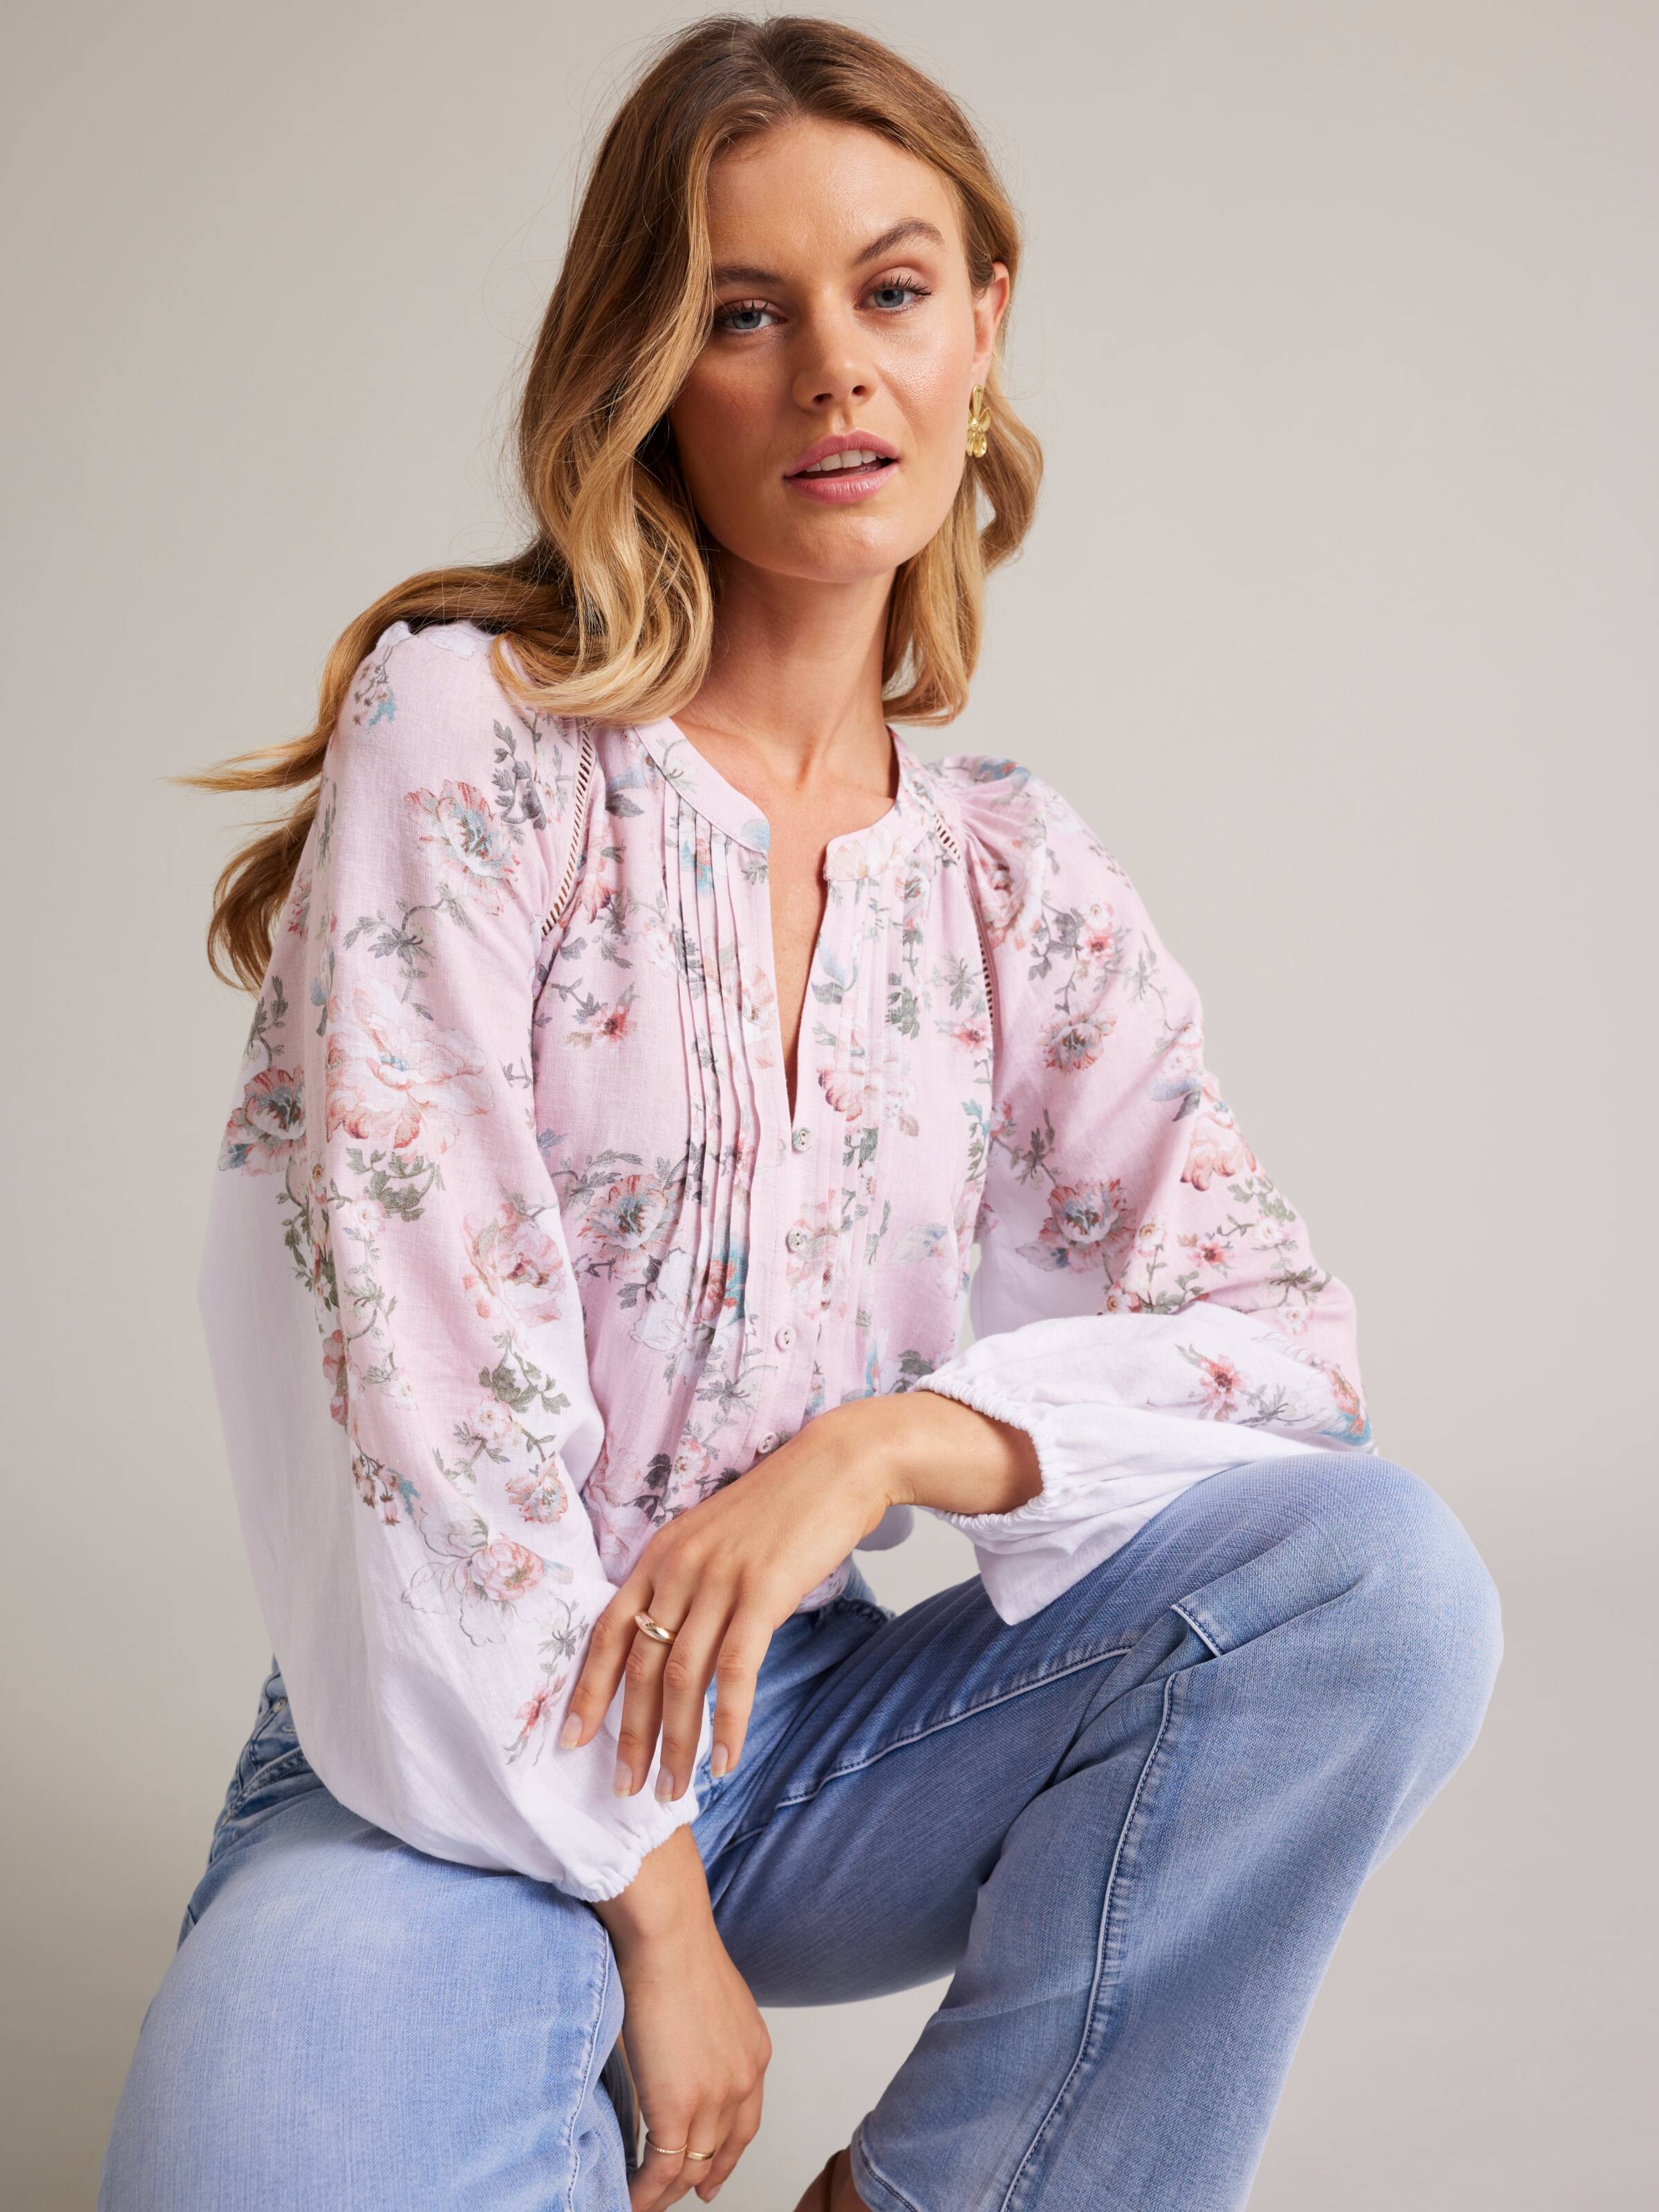 Evening Tops  Buy Womens Tops & Blouses Online Australia- THE ICONIC